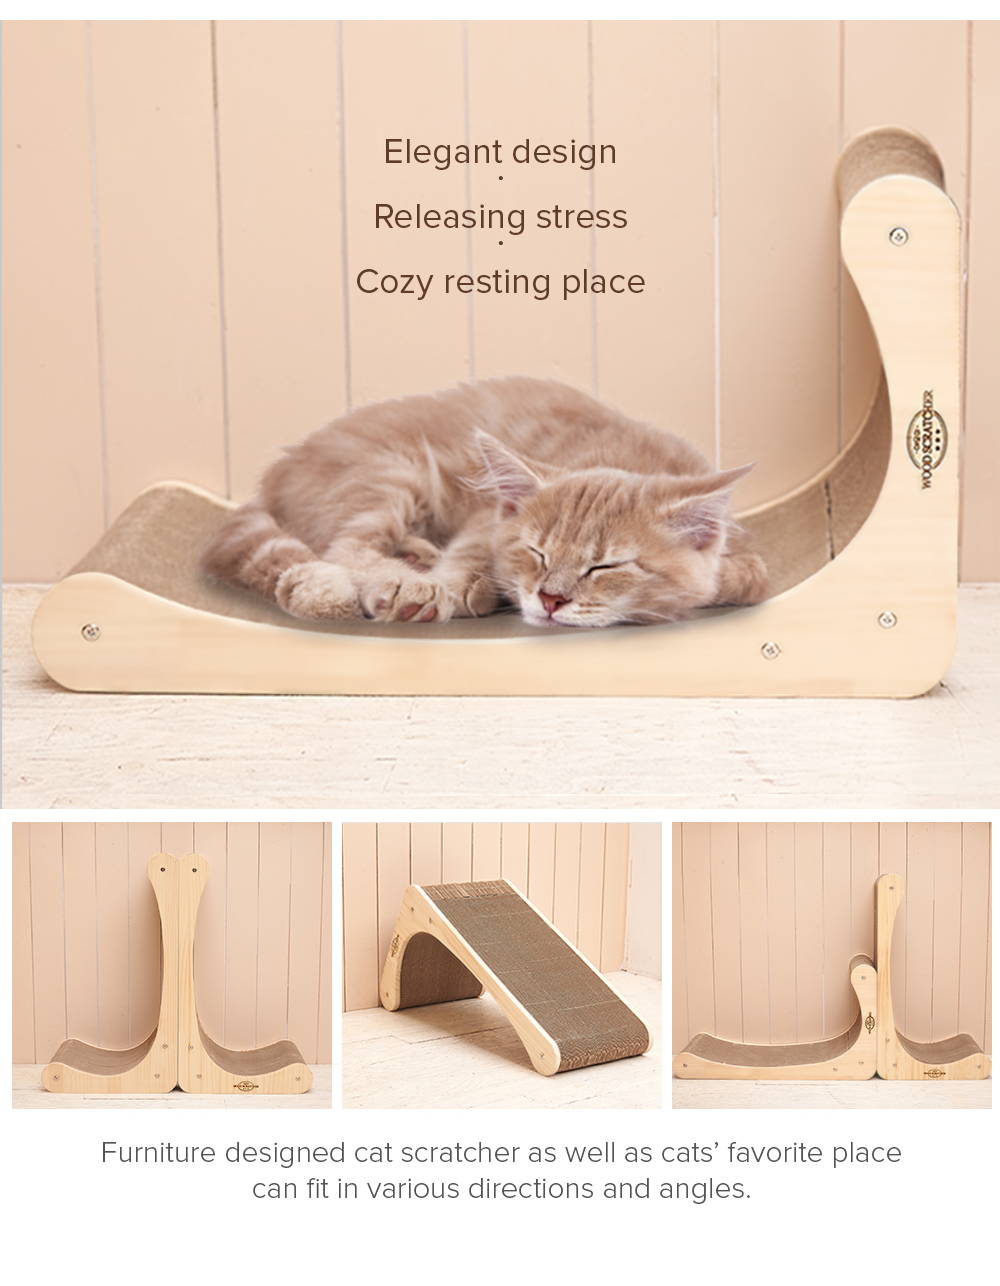 yaomi, cat scratcher, premium L scratcher, real hard wood cat scratcher, premium hardwood cat scratcher, replaceable hardwood cat scratcher, replaceable corrugated cardboard, easy to refill, eco-friendly, environment-friendly, non-toxic, furniture design, protect home furniture, relaxing place, releasing stress, strong, tall, perpendicular, 90 degree angle, high-quality, korean product